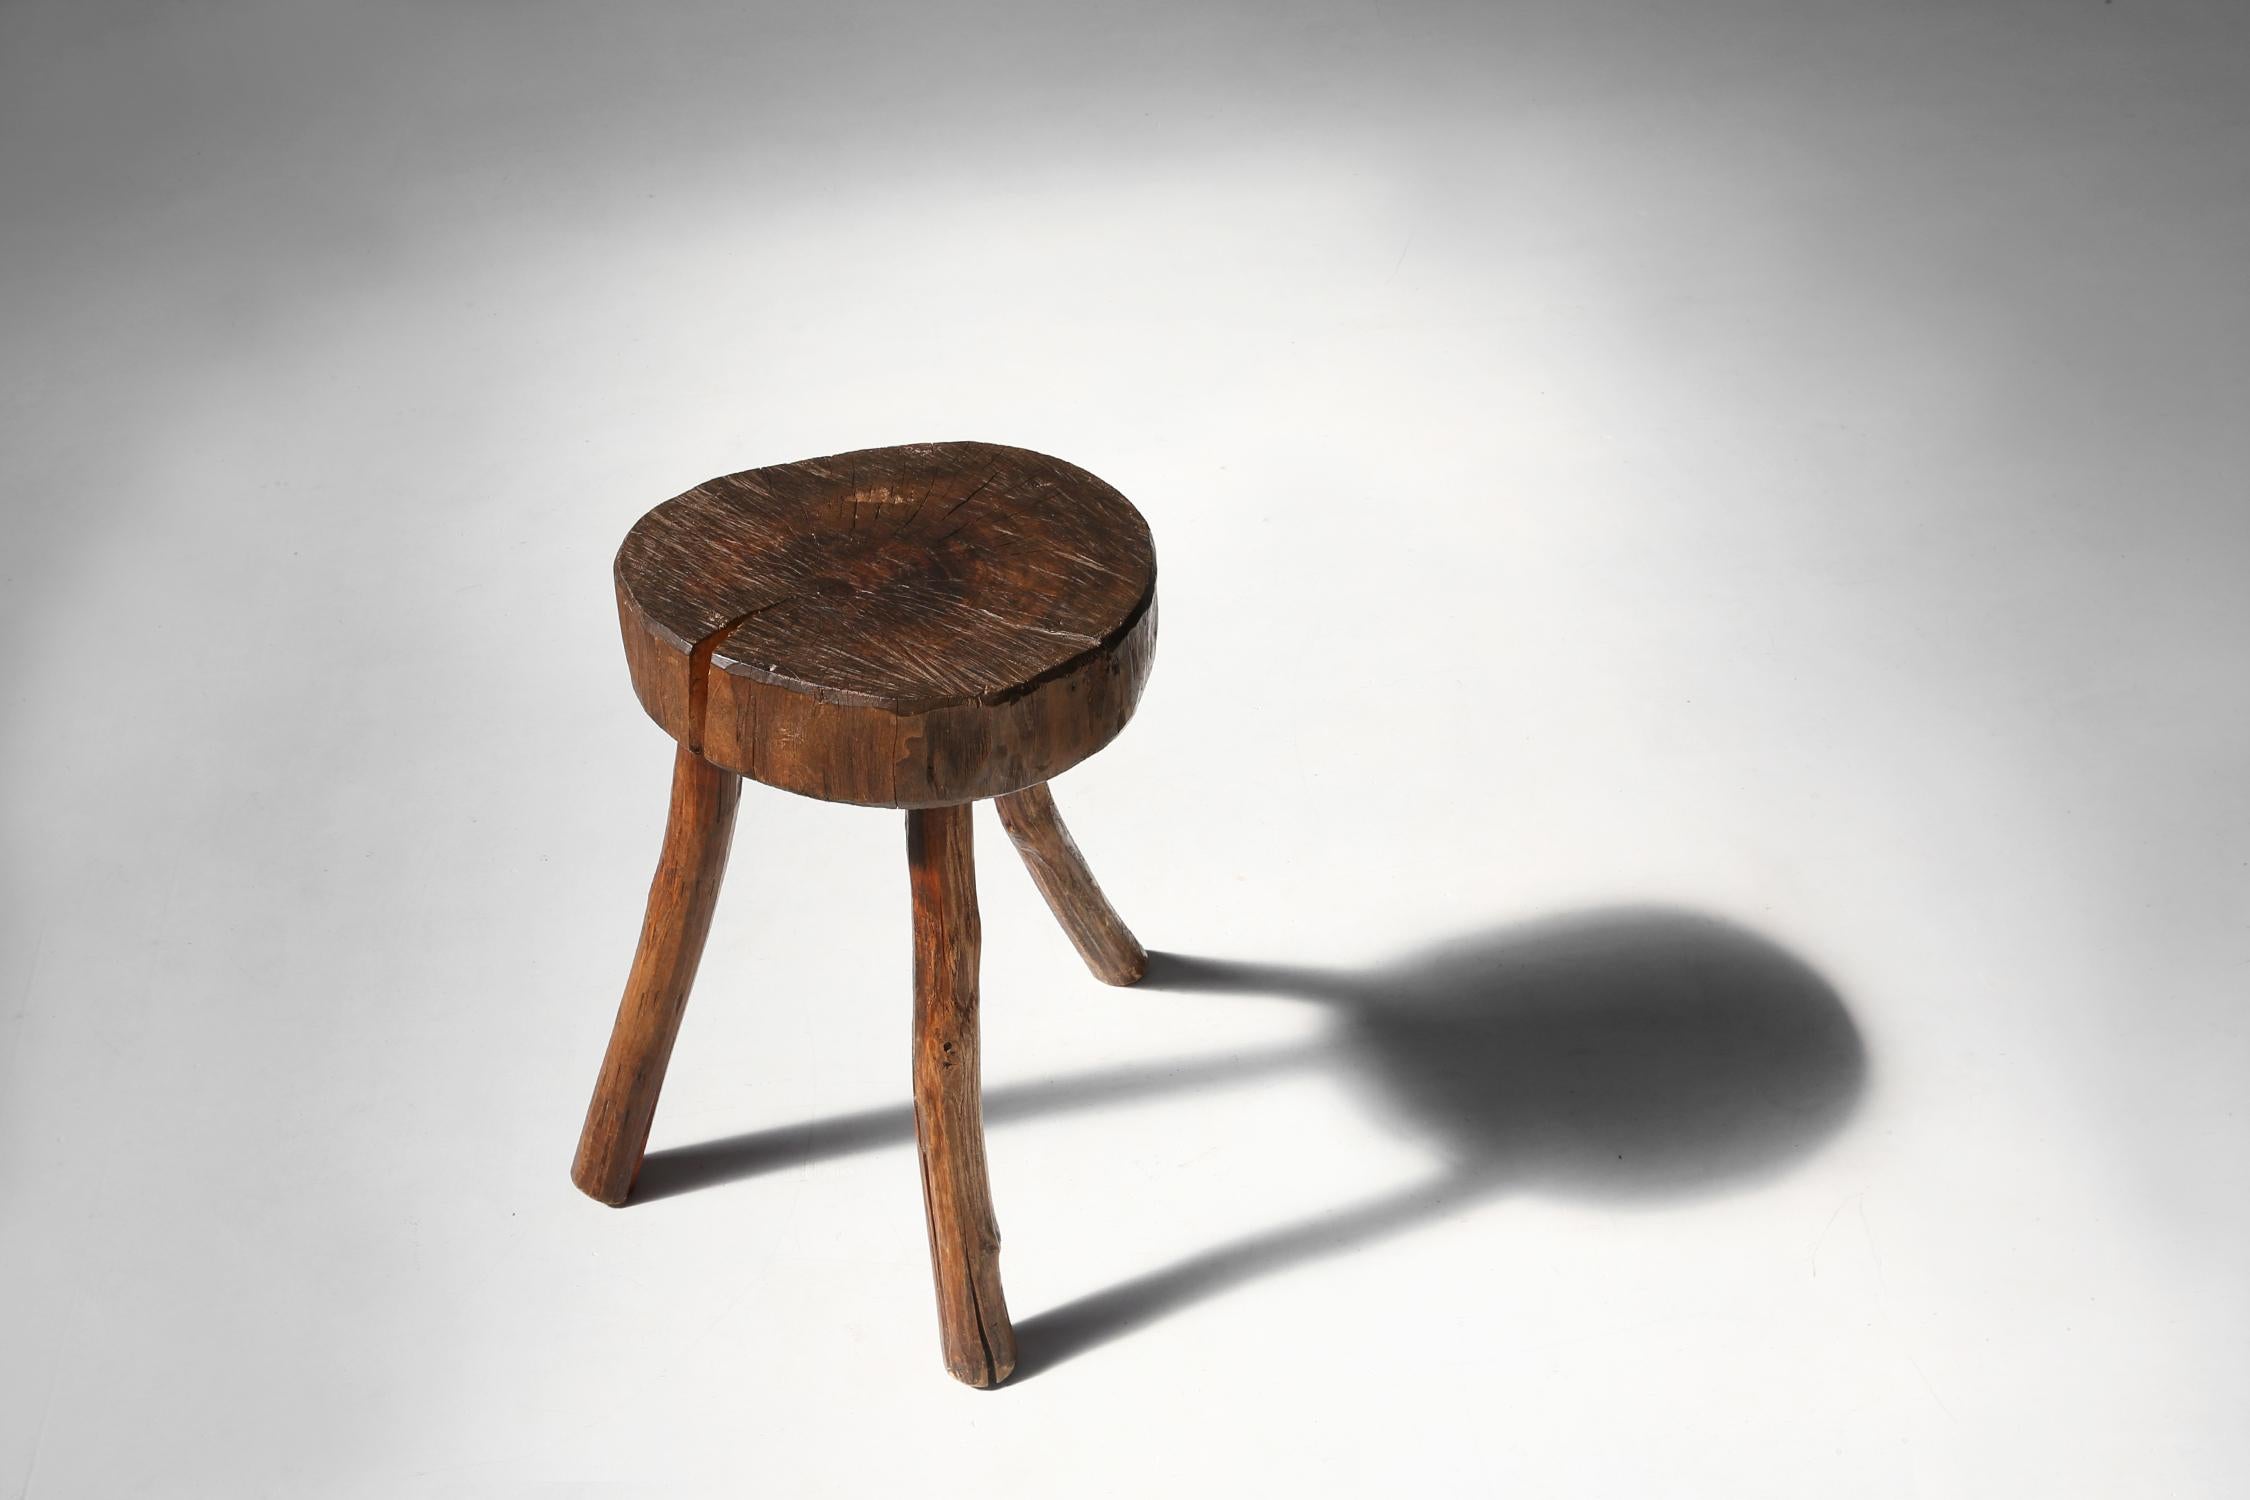 French Rustic Wooden Stool, 19th Century